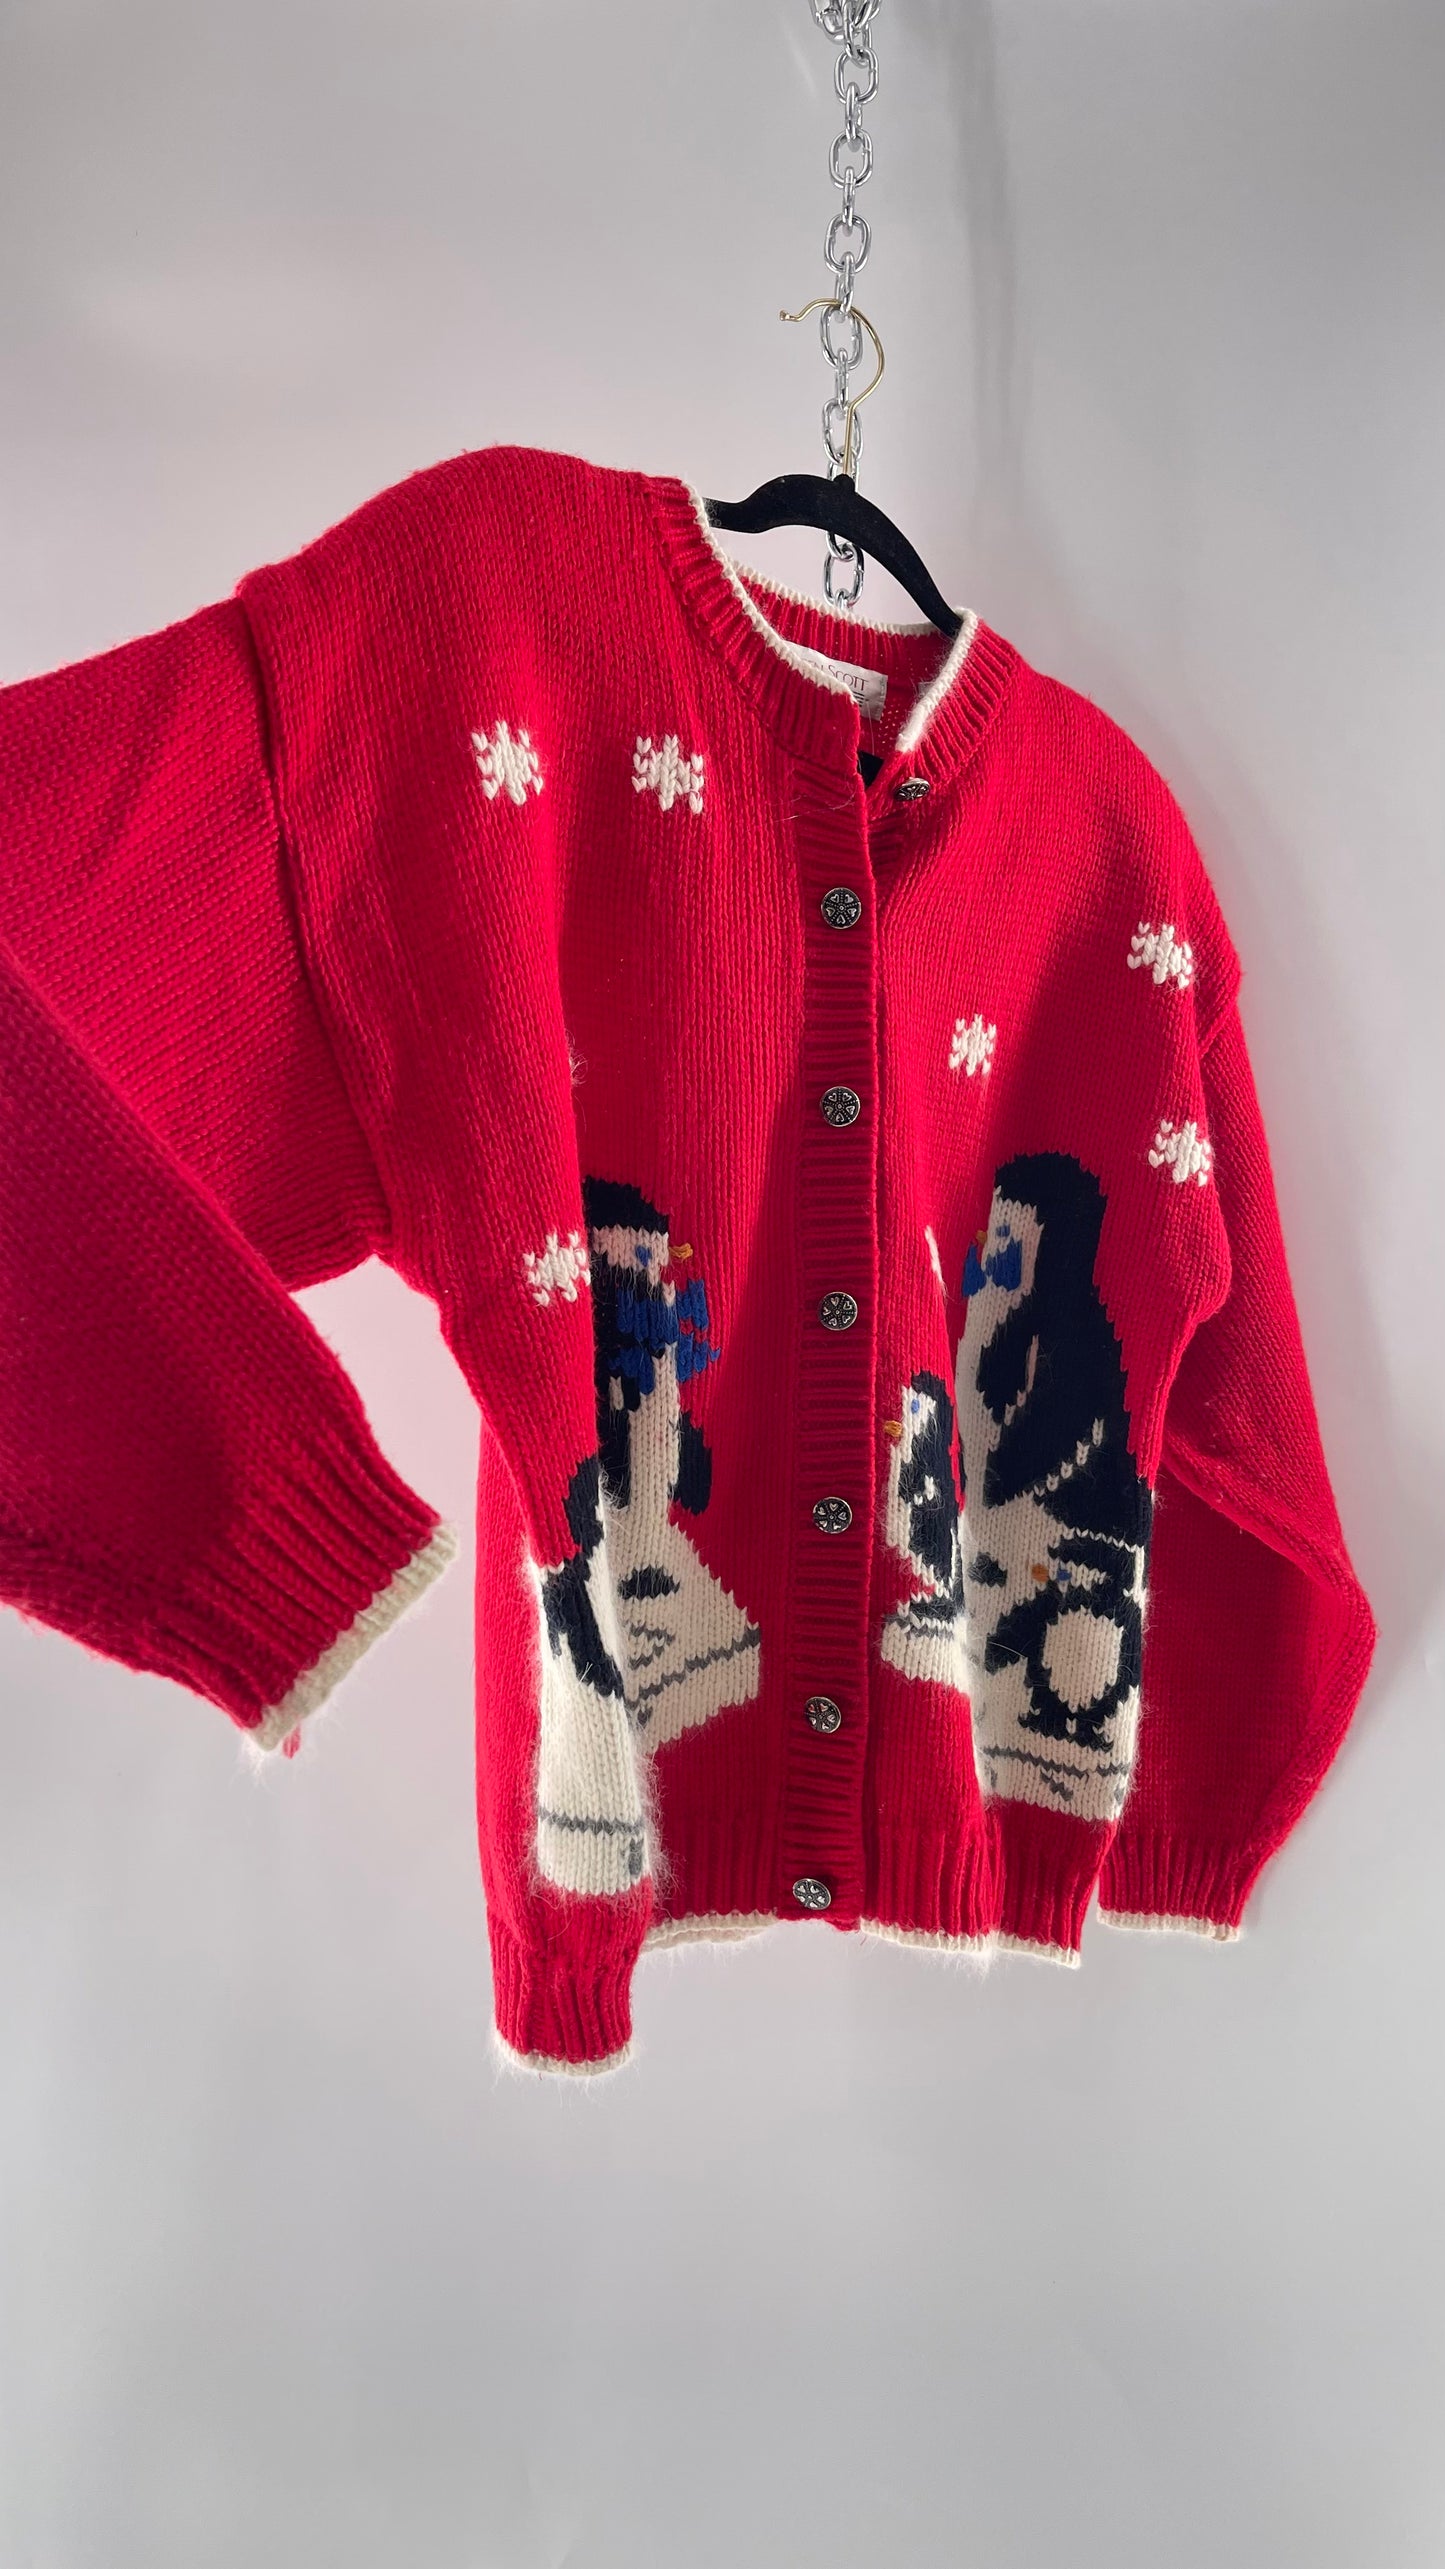 Vintage Karen Scott Silver Button Front, Red Cardigan with Shoulder Padding and the Sweetest Festive Penguins in Bow Ties (Large)